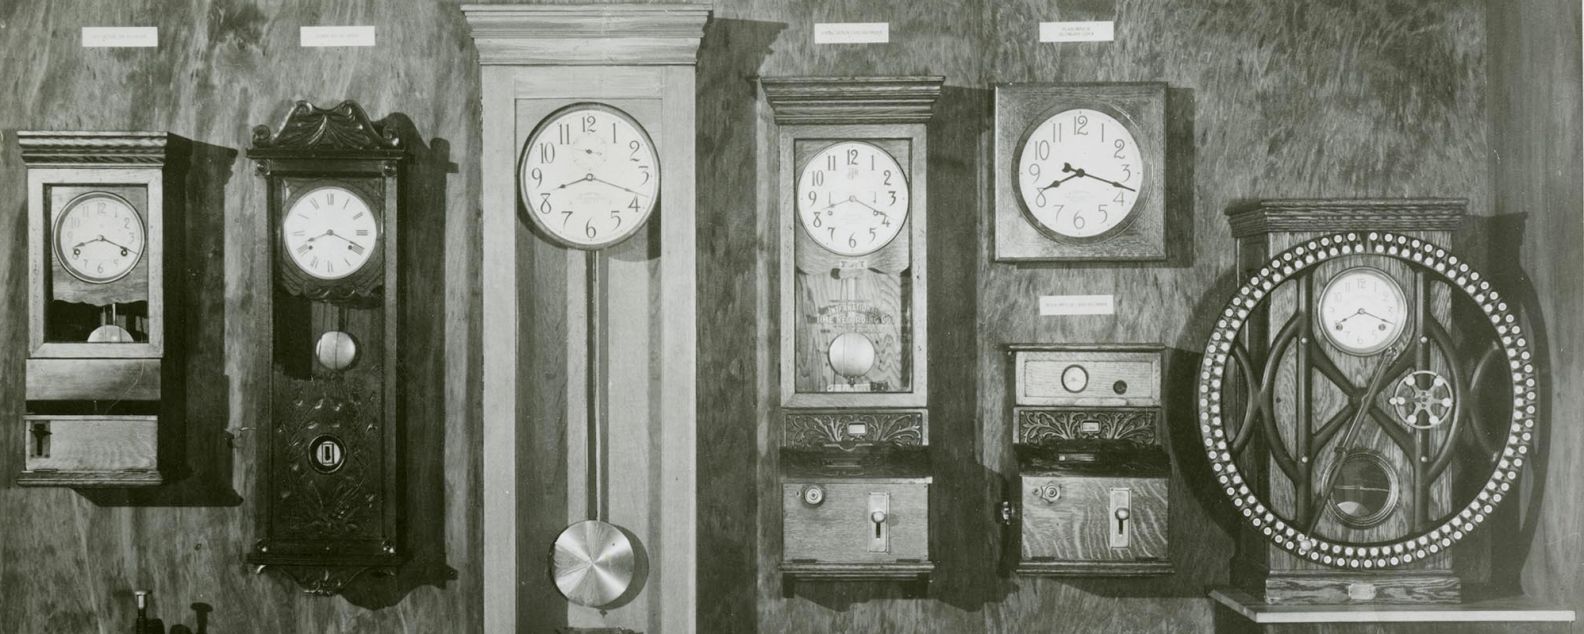 Display of 8 ITR timeclock machines, captioned "1914 time recording products"